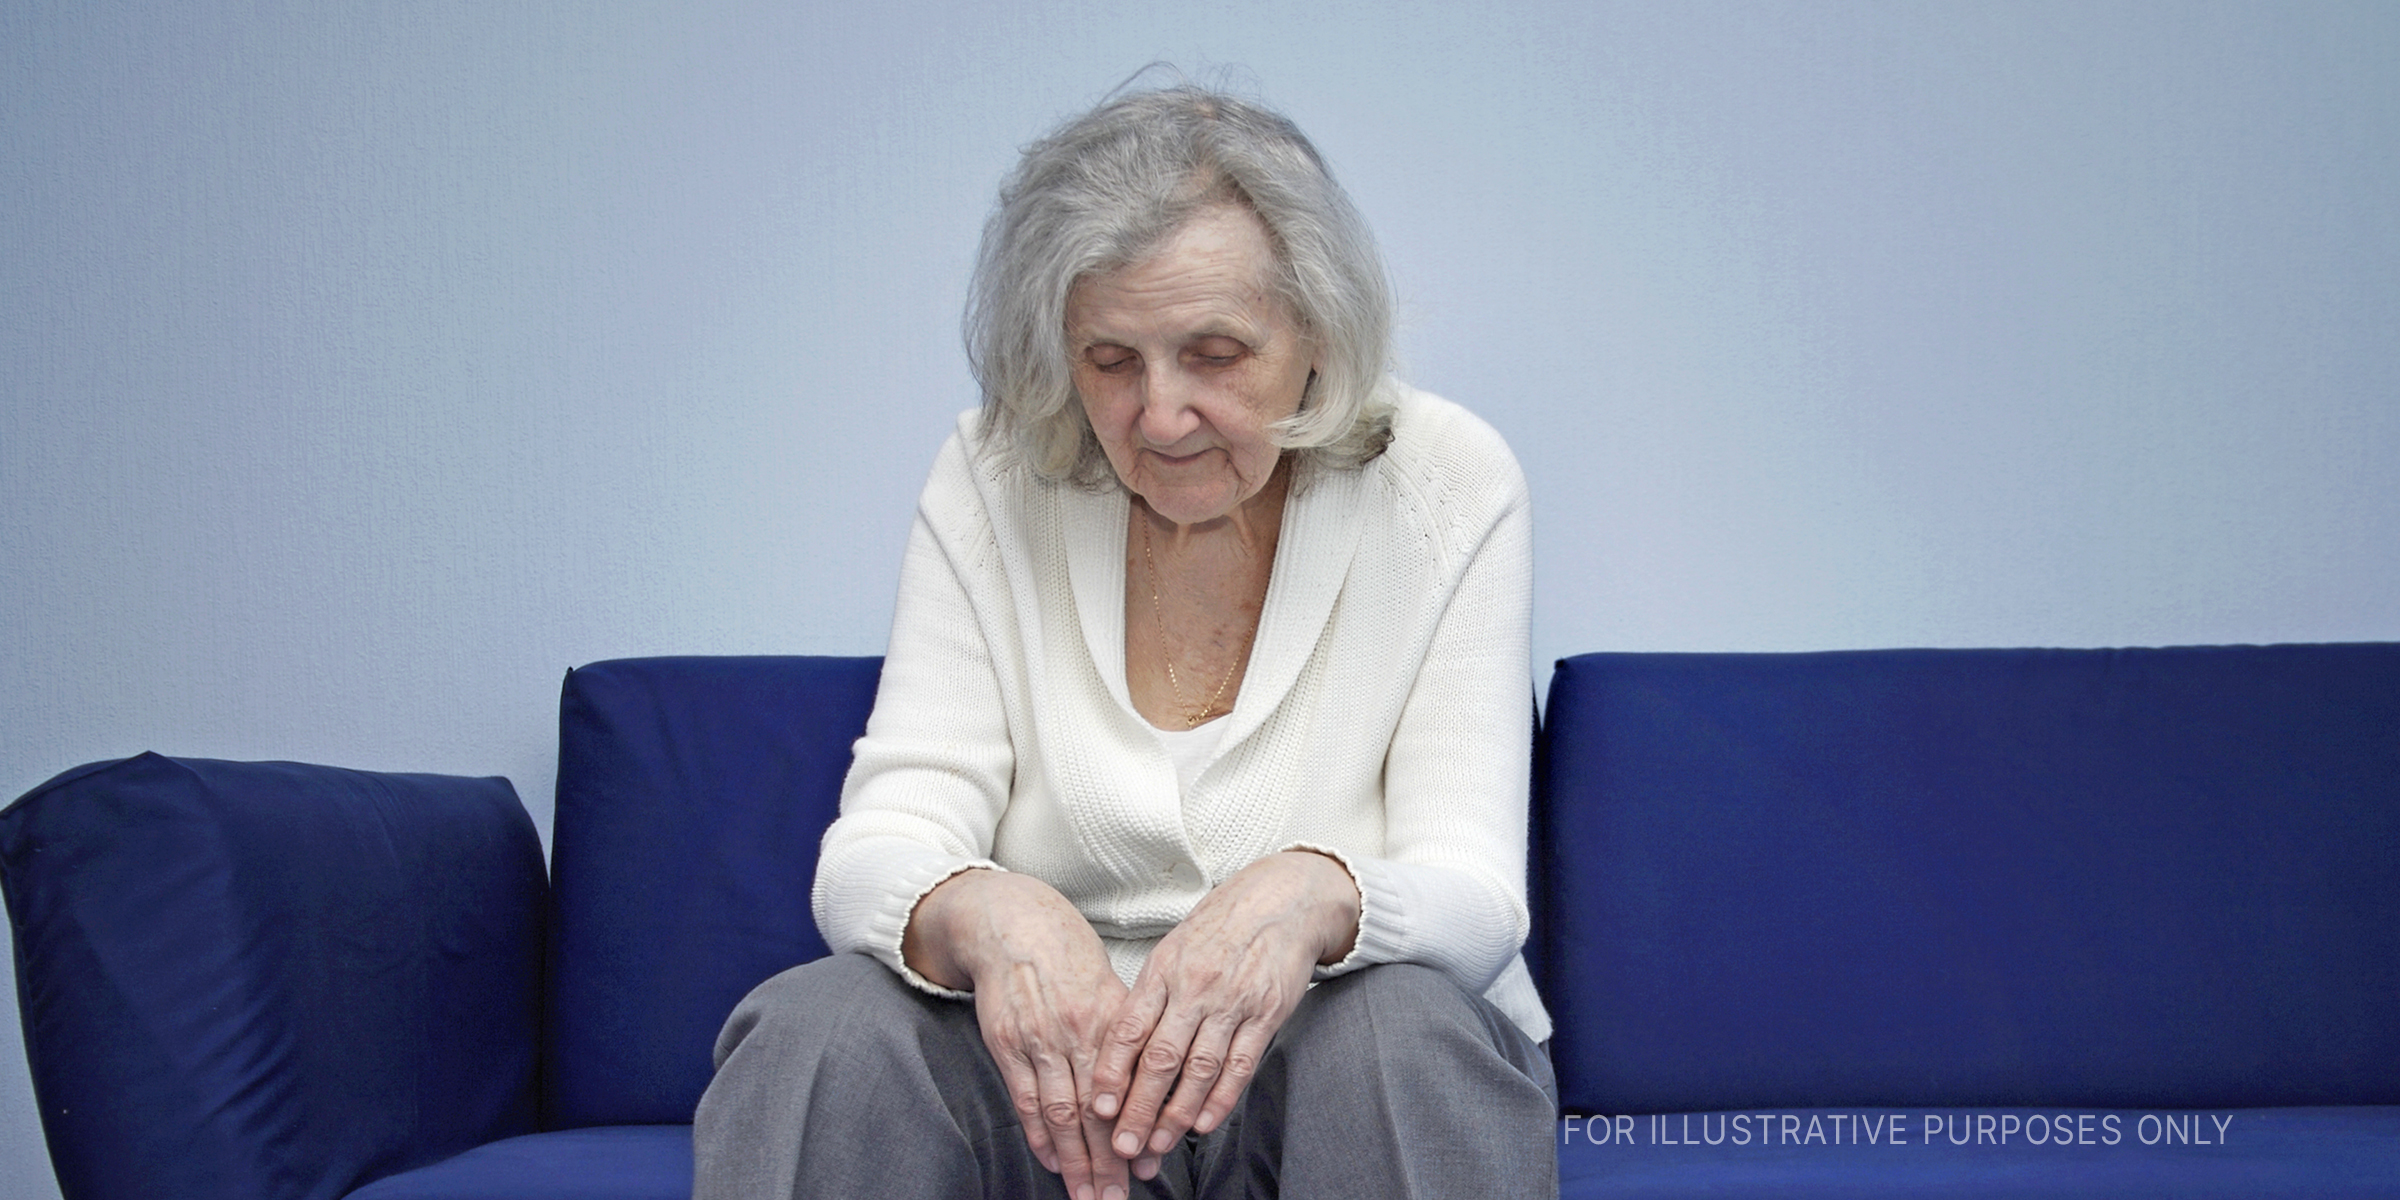 Tired elderly woman sitting on couch | Source: Getty Images